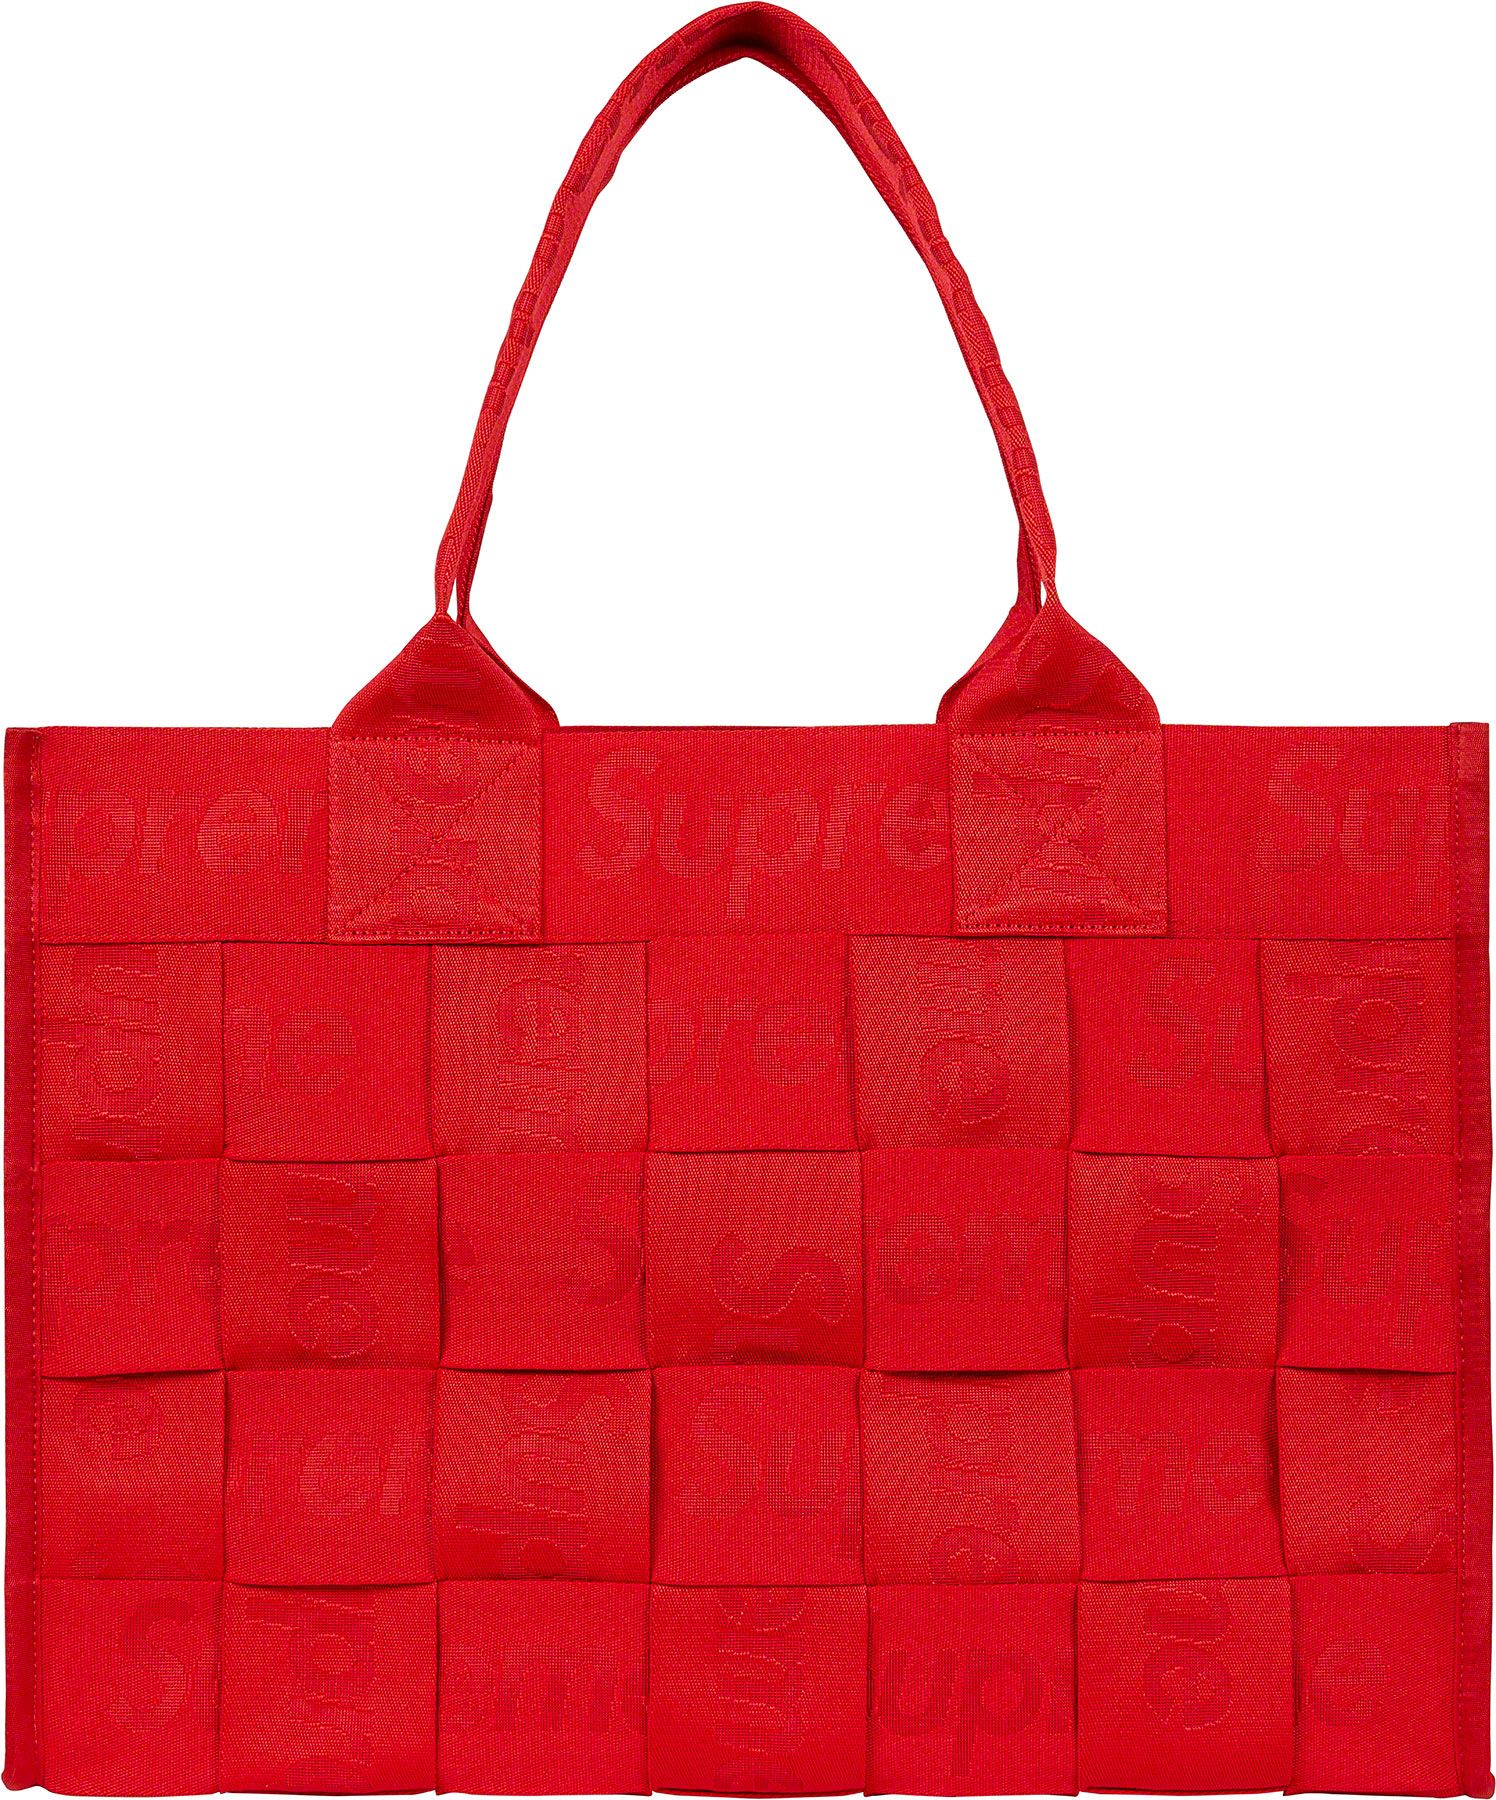 Woven Large Tote - Spring/Summer 2023 Preview – Supreme